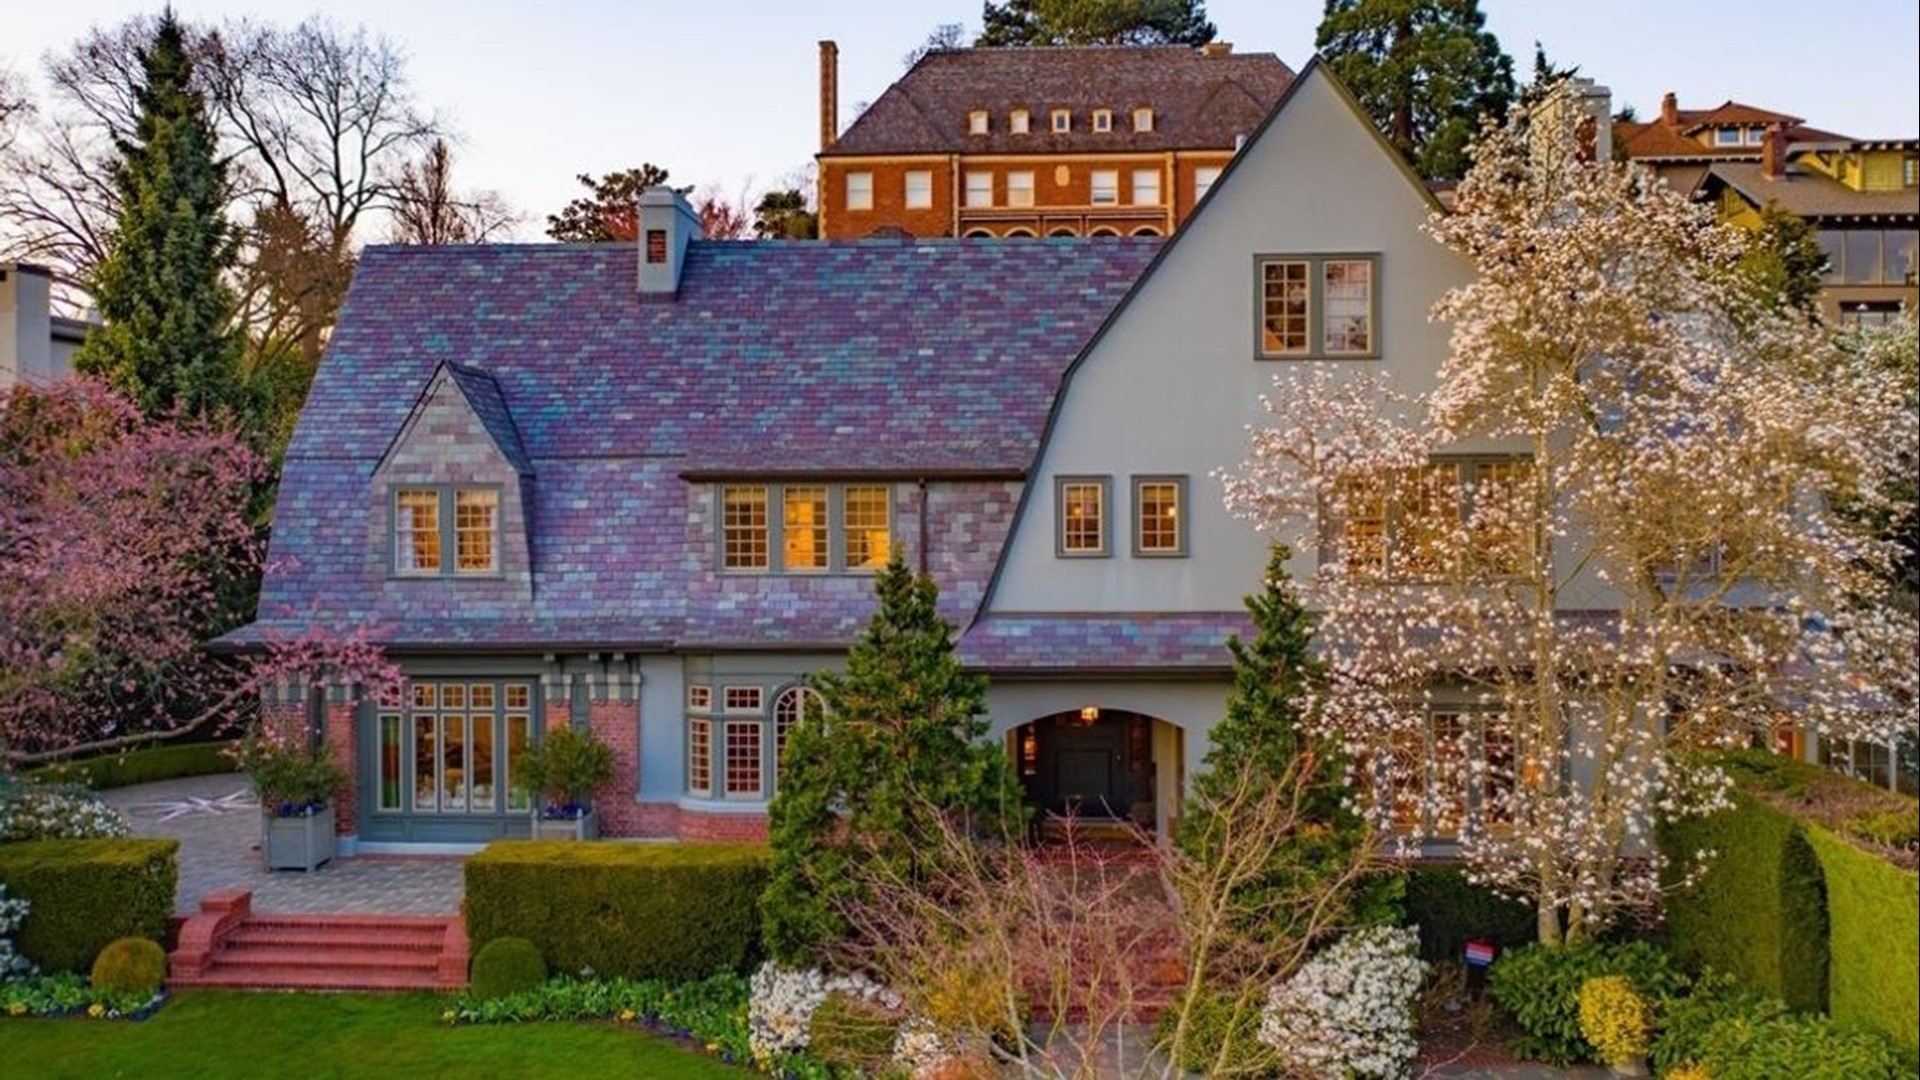 A lot has changed in Seattle since this historic home was built 116 years ago